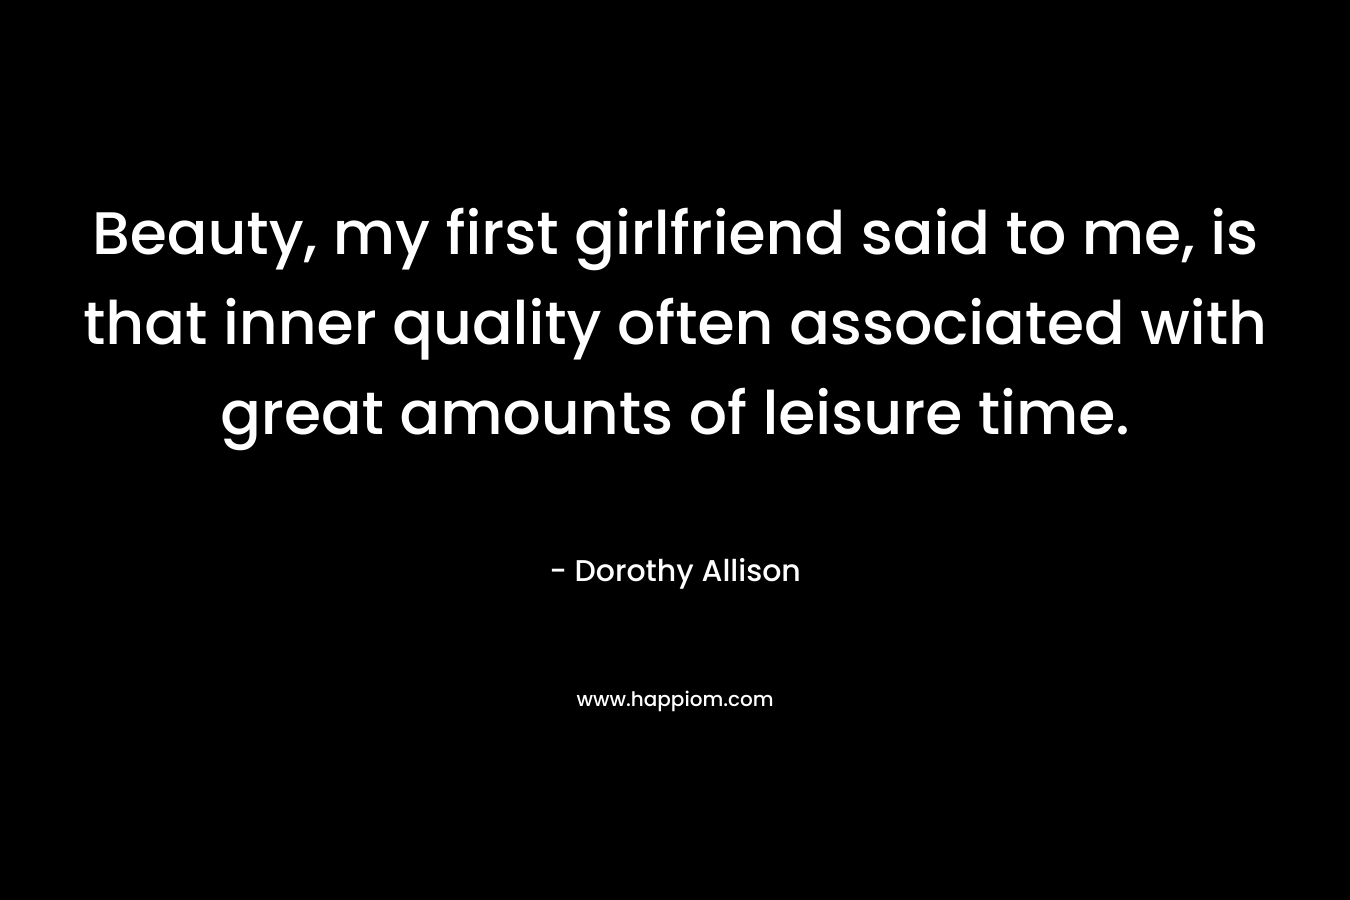 Beauty, my first girlfriend said to me, is that inner quality often associated with great amounts of leisure time.